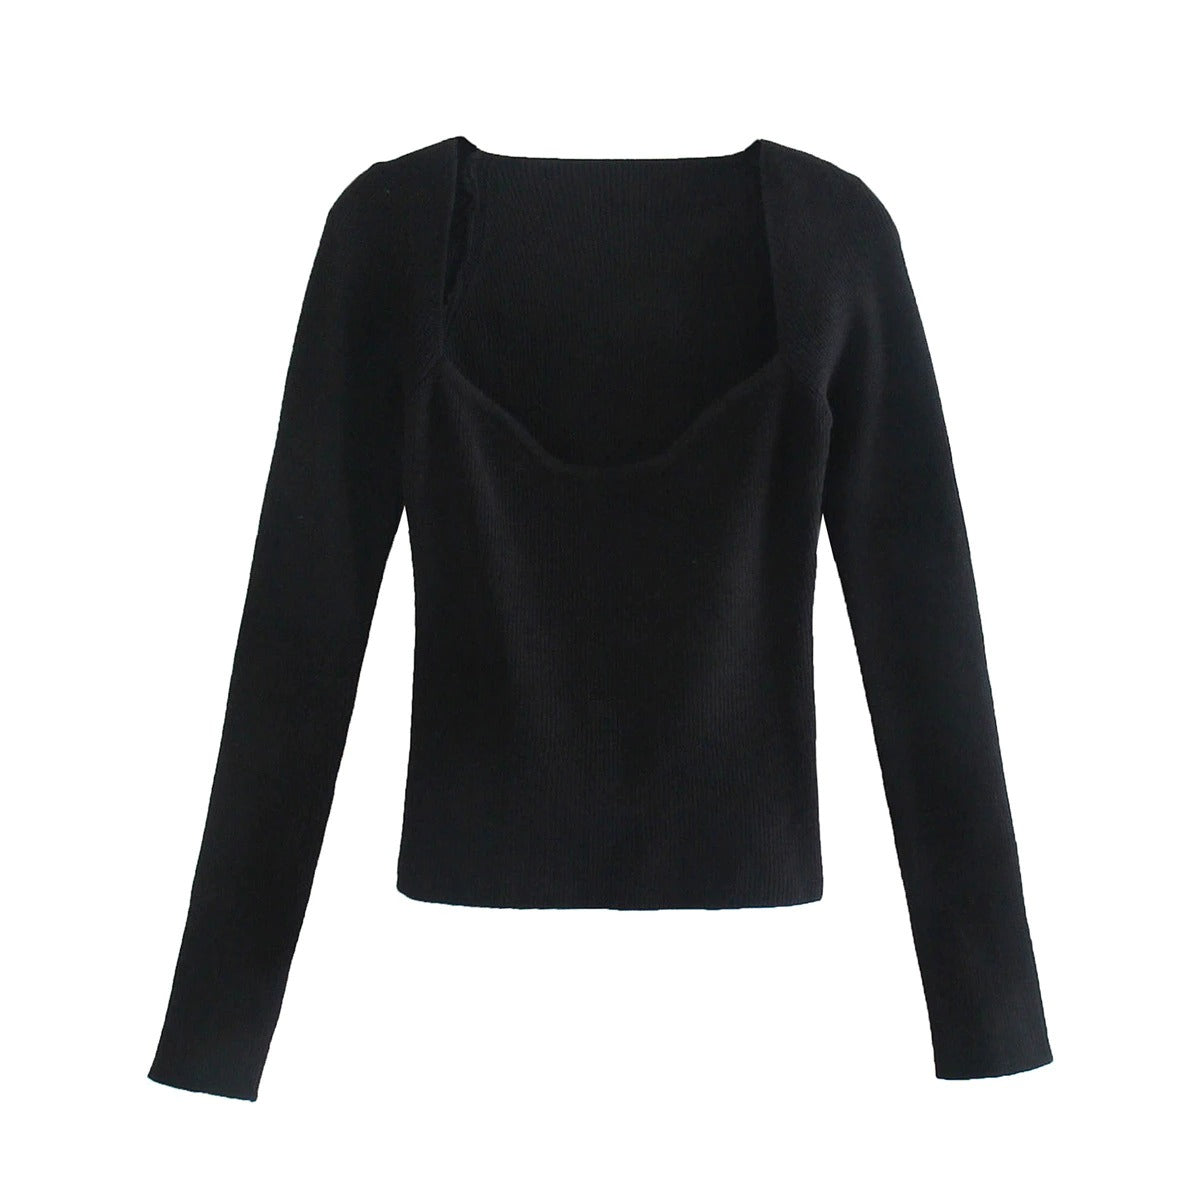 Coco Sweetheart Neckline Fitted Knit Top Coco Tops